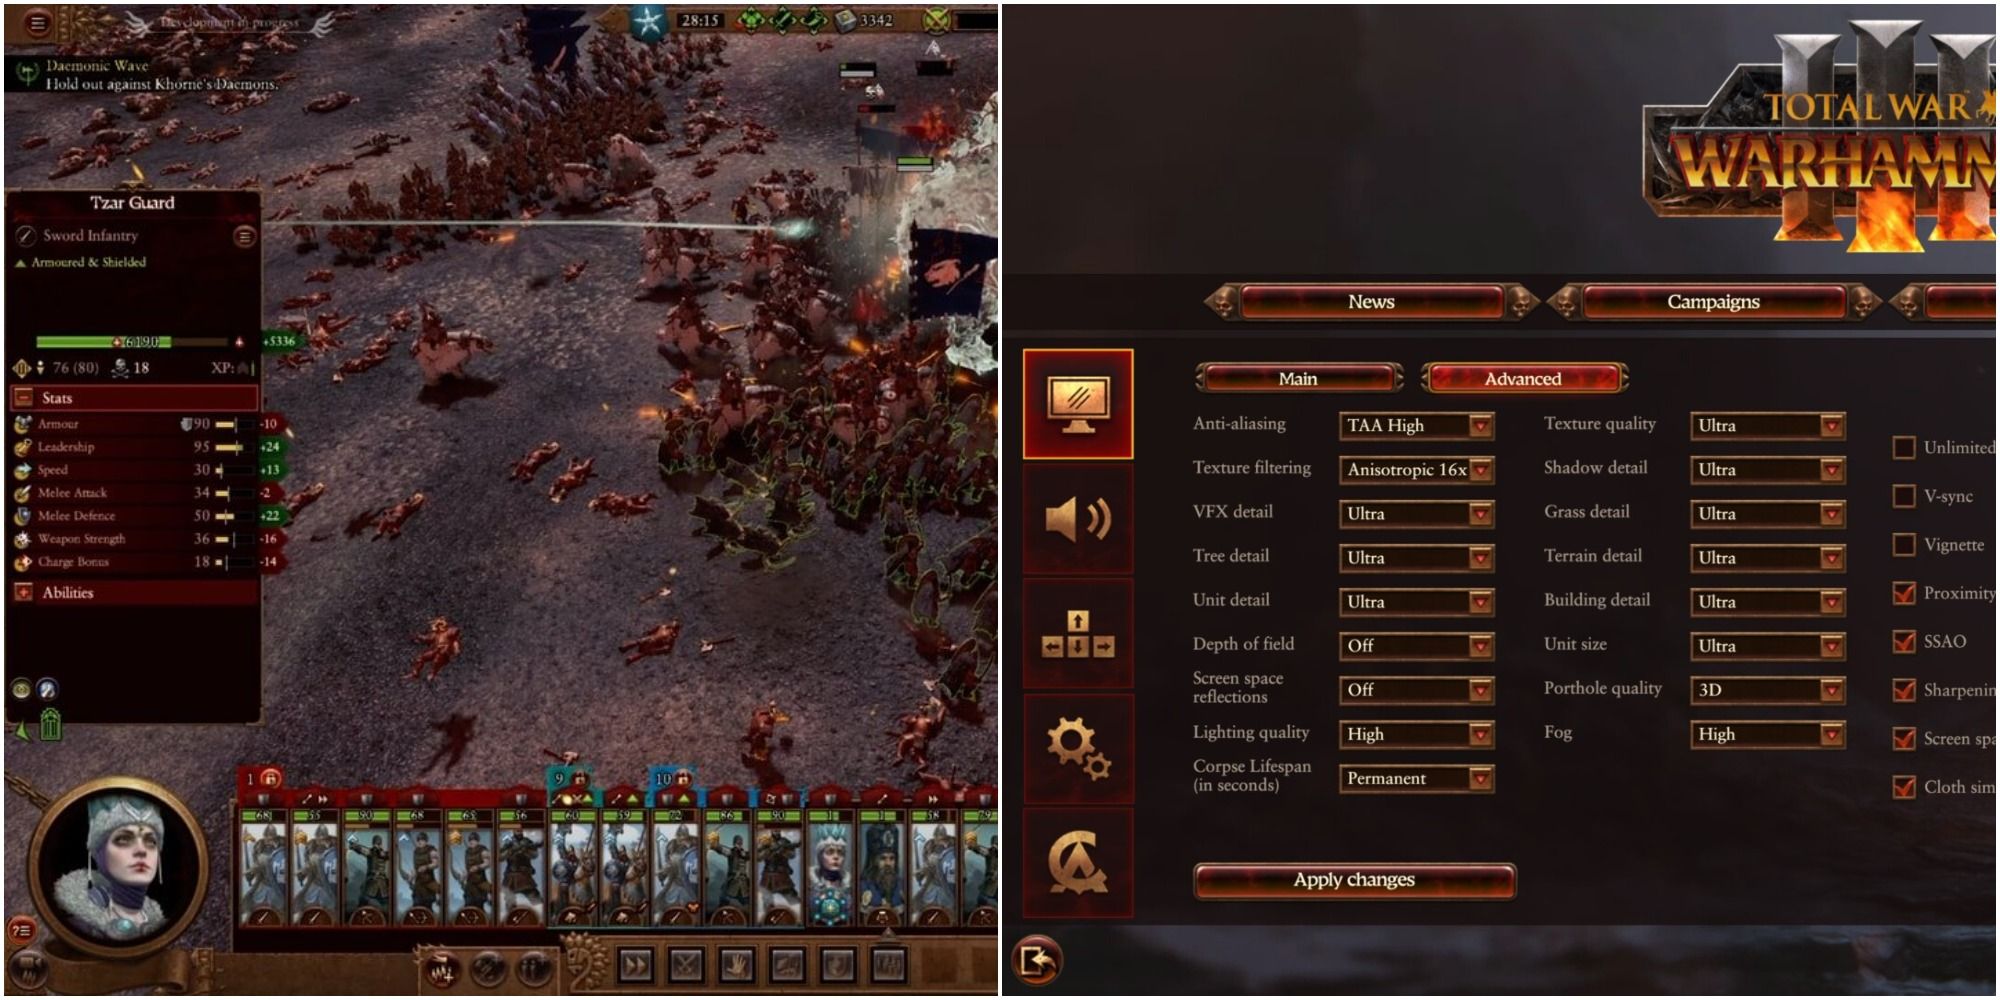 Total War Warhammer 3 User Interface showing the battle UI and the main menu